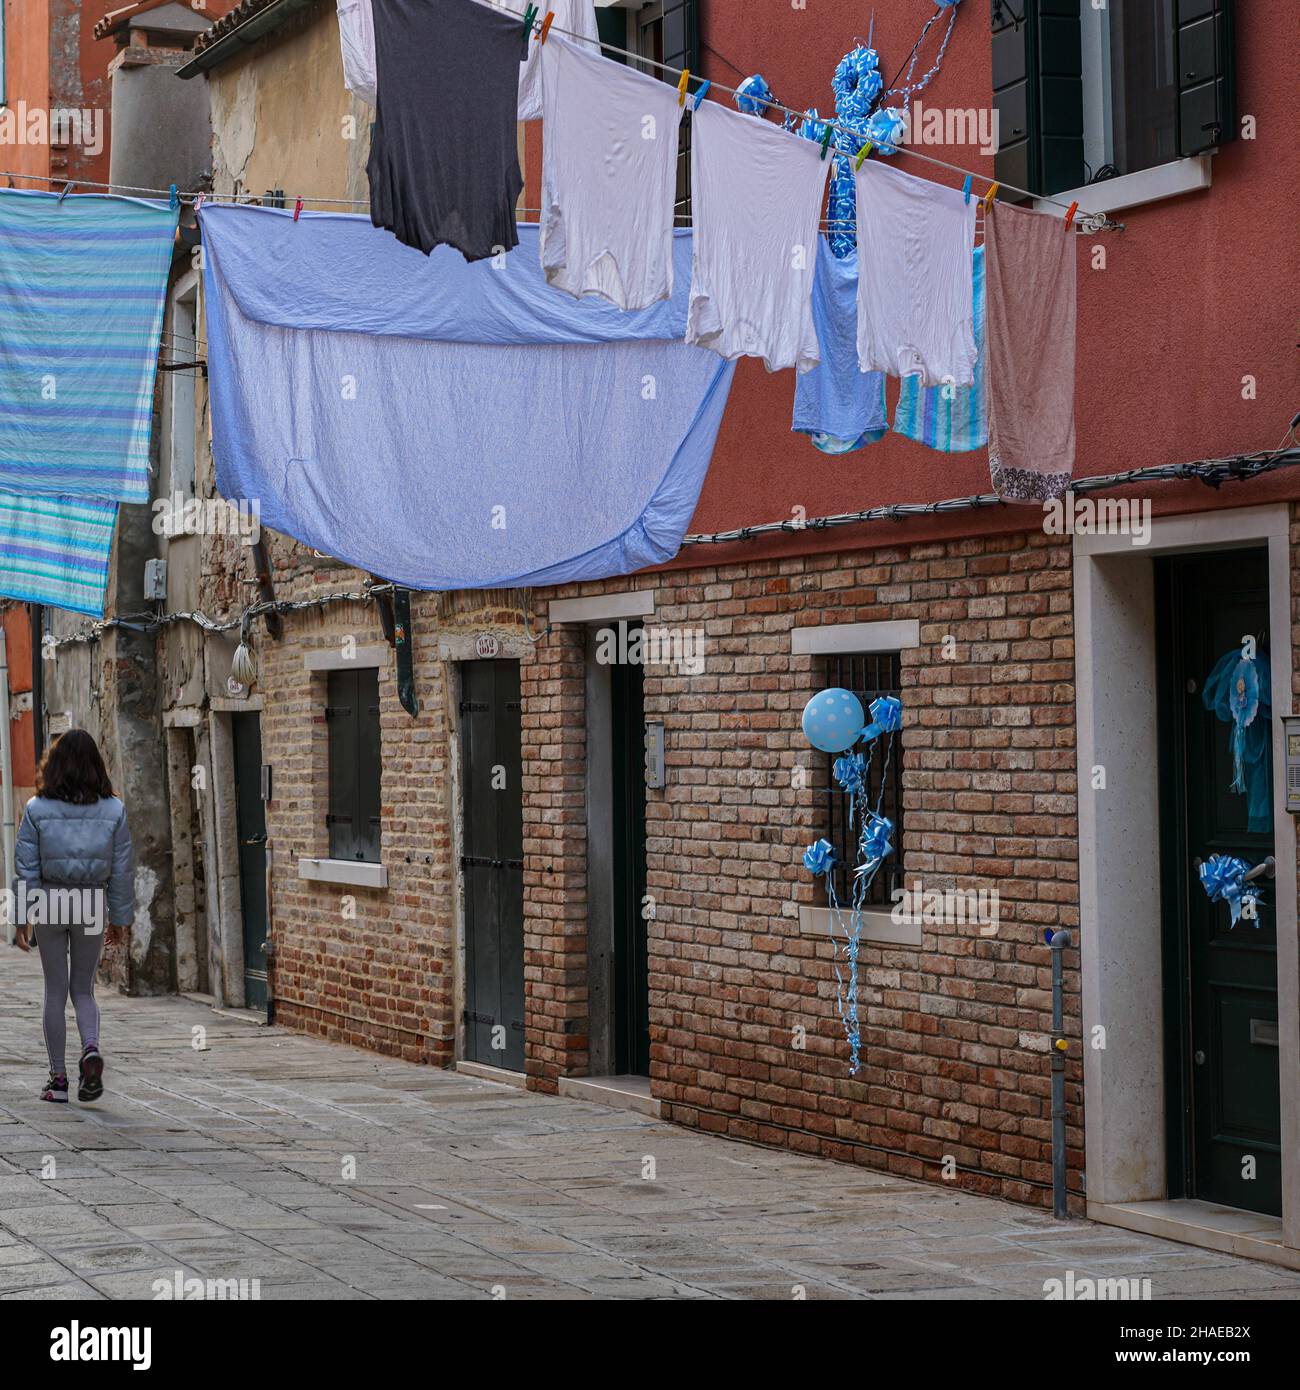 A young woman walks through a narrow alley in Venice. Laundry hangs to dry on linen above her. Blue party balloons hang from windows and doors. Stock Photo